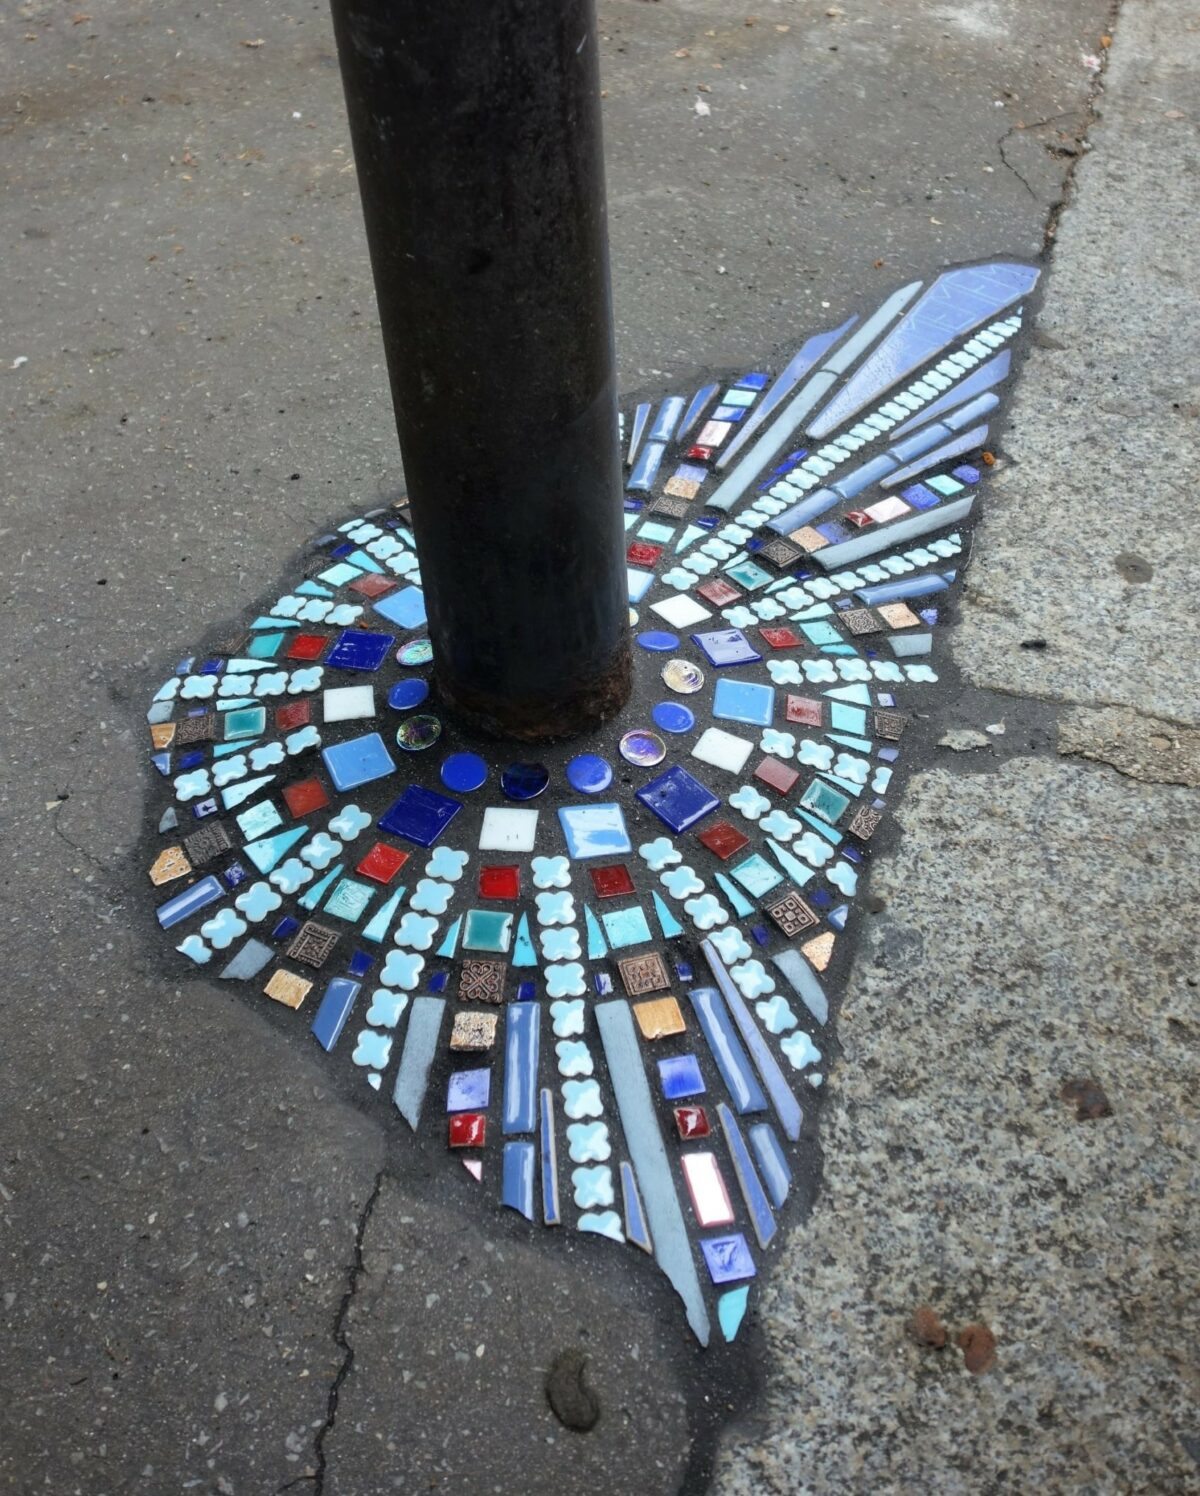 Fractured sidewalks, pavements, and walls repaired with vibrant tiled mosaics by Ememem